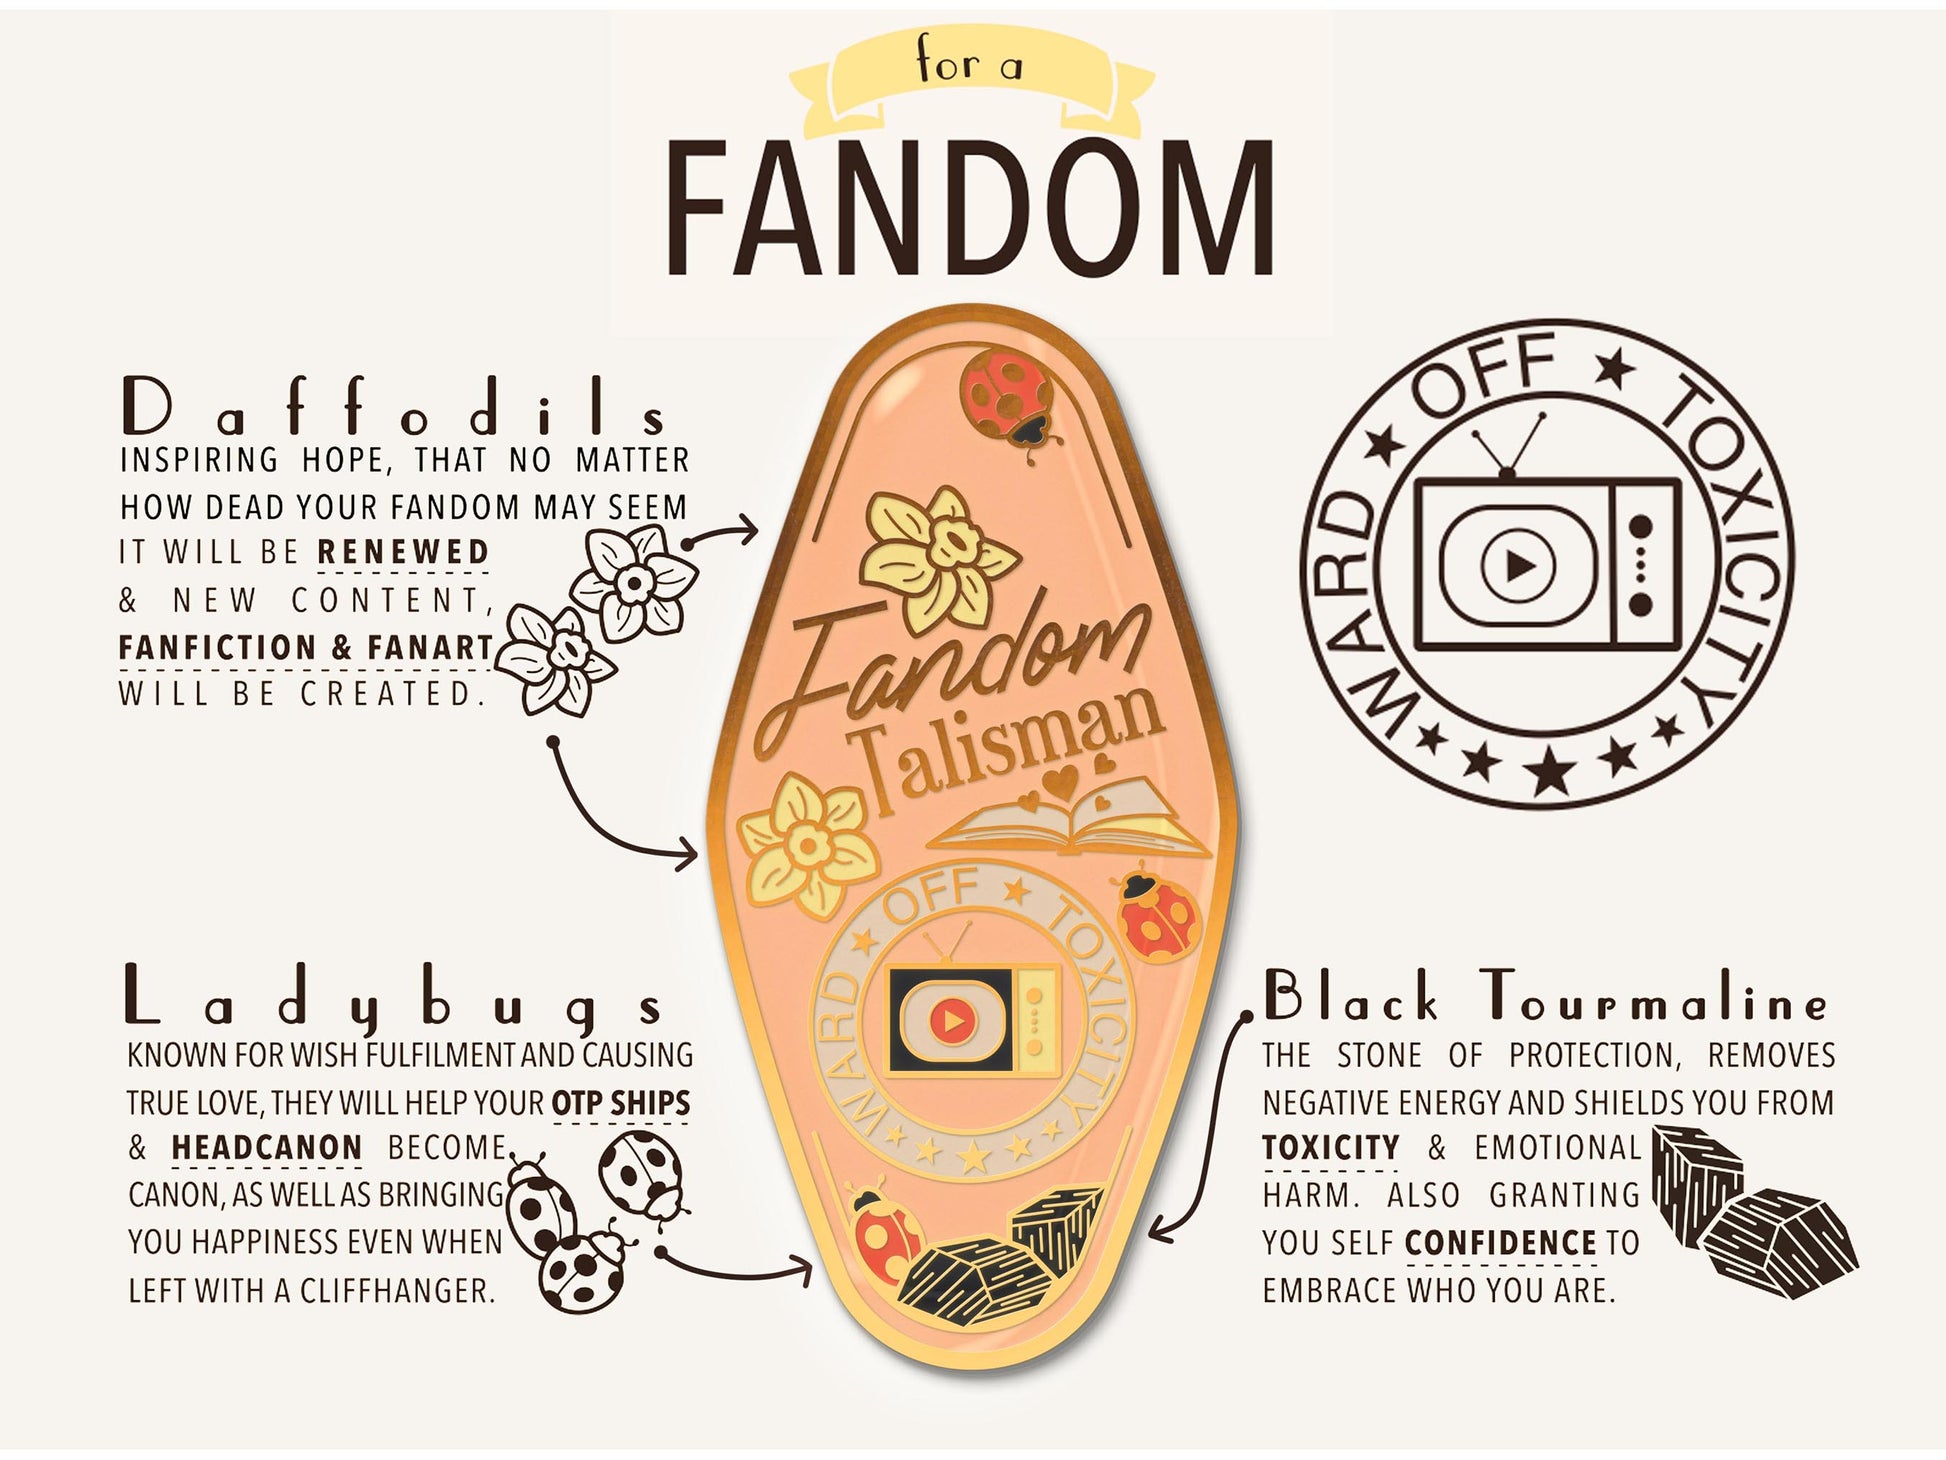 A illustrated diagram outline the symbolism of the different design elements of the for a Fandom Talisman pin. Information includes the meaning of the Daffodils, ladybugs, and black tourmaline.